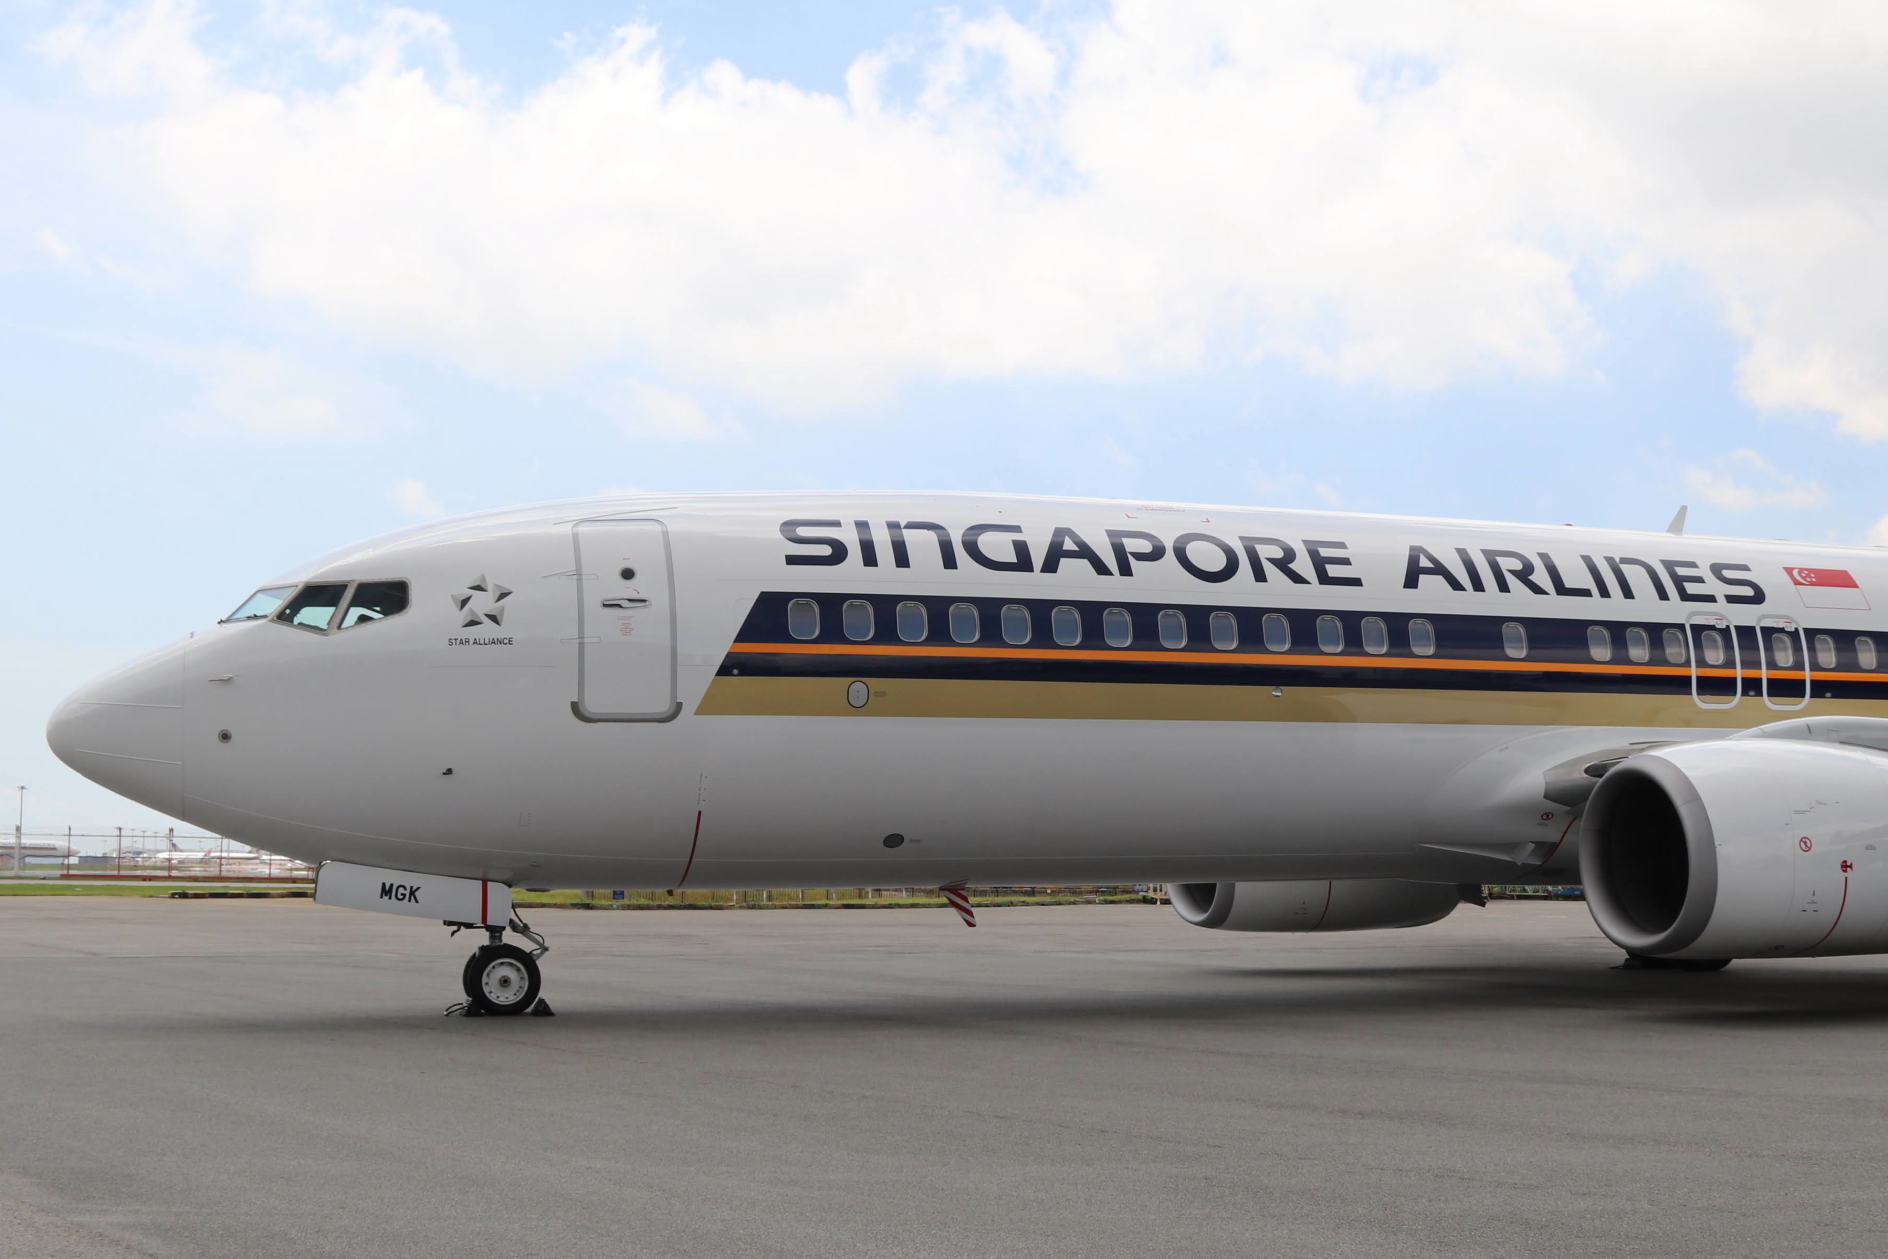 Singapore Airlines Boeing 737-800 NG reg: 9V-MGK. Click to enlarge.